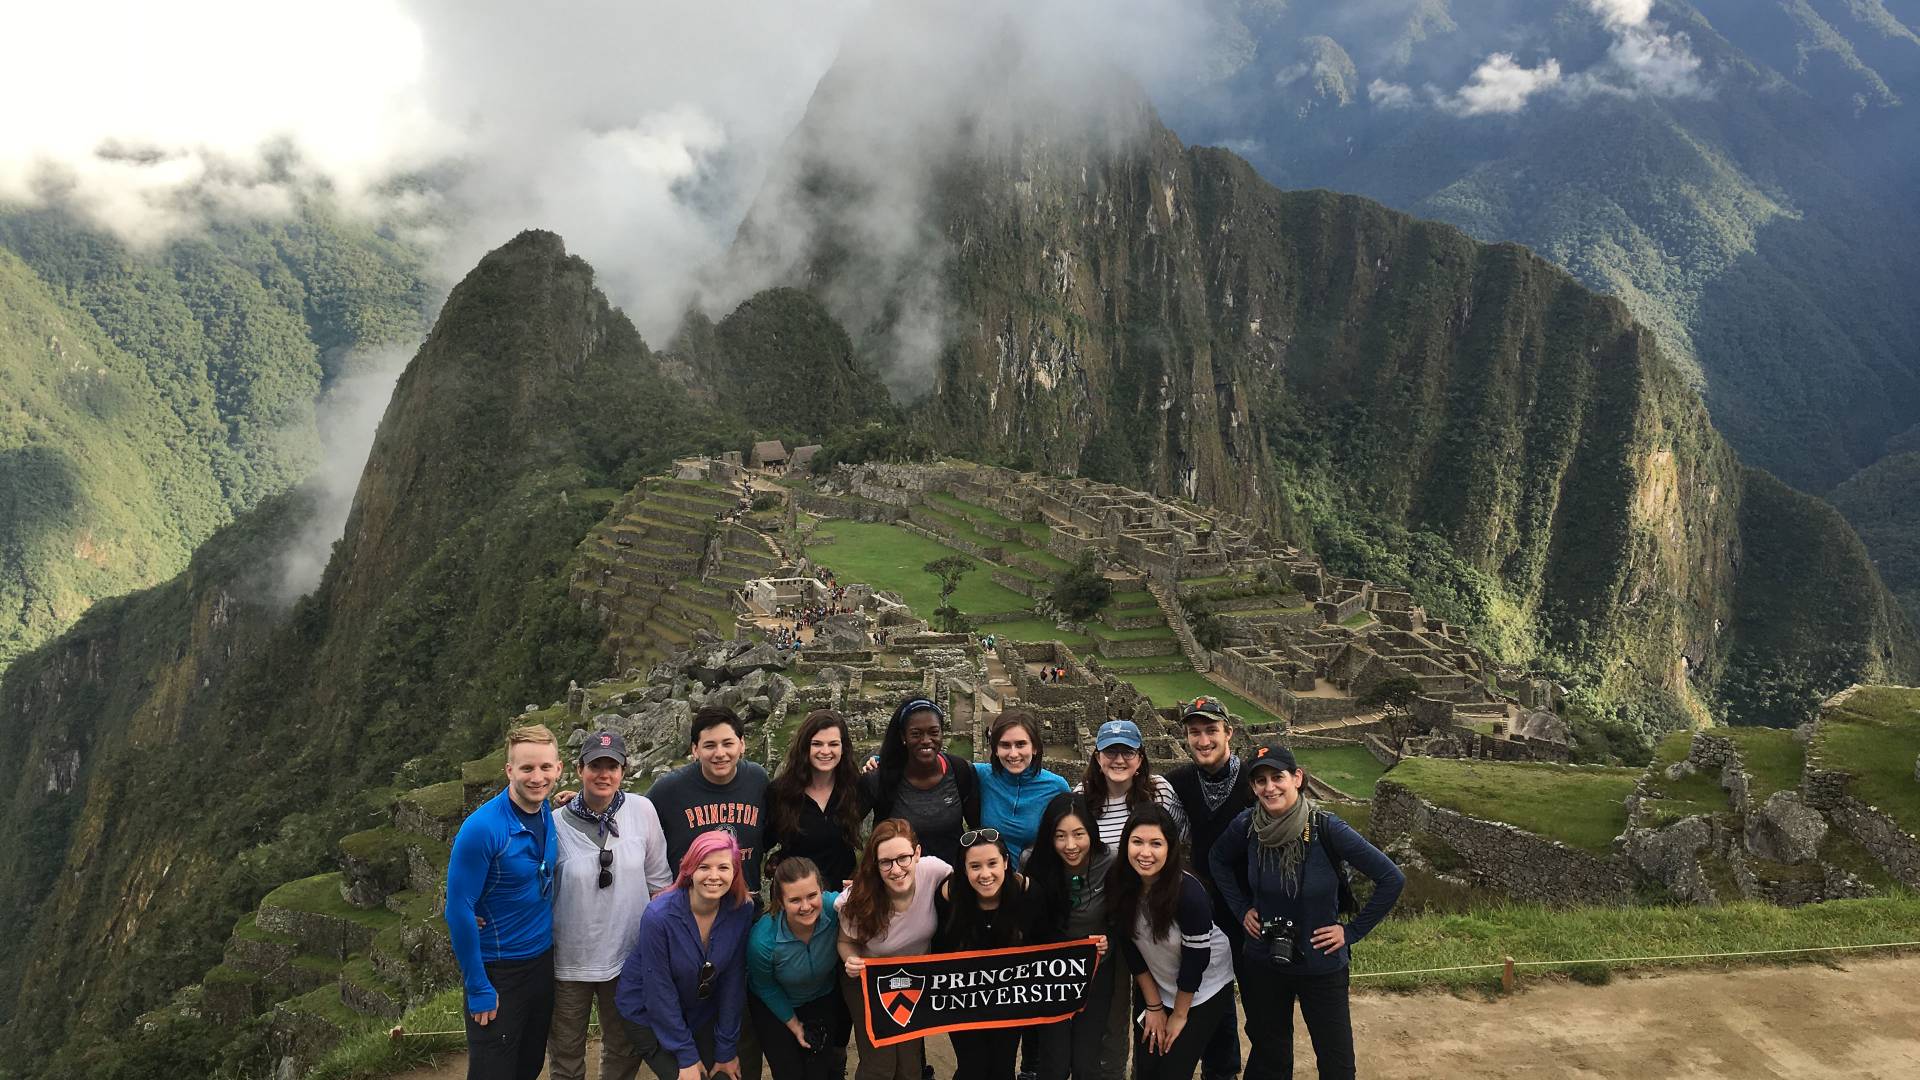 Students stand in a group holding a Princeton University banner in front of Machu Picchu